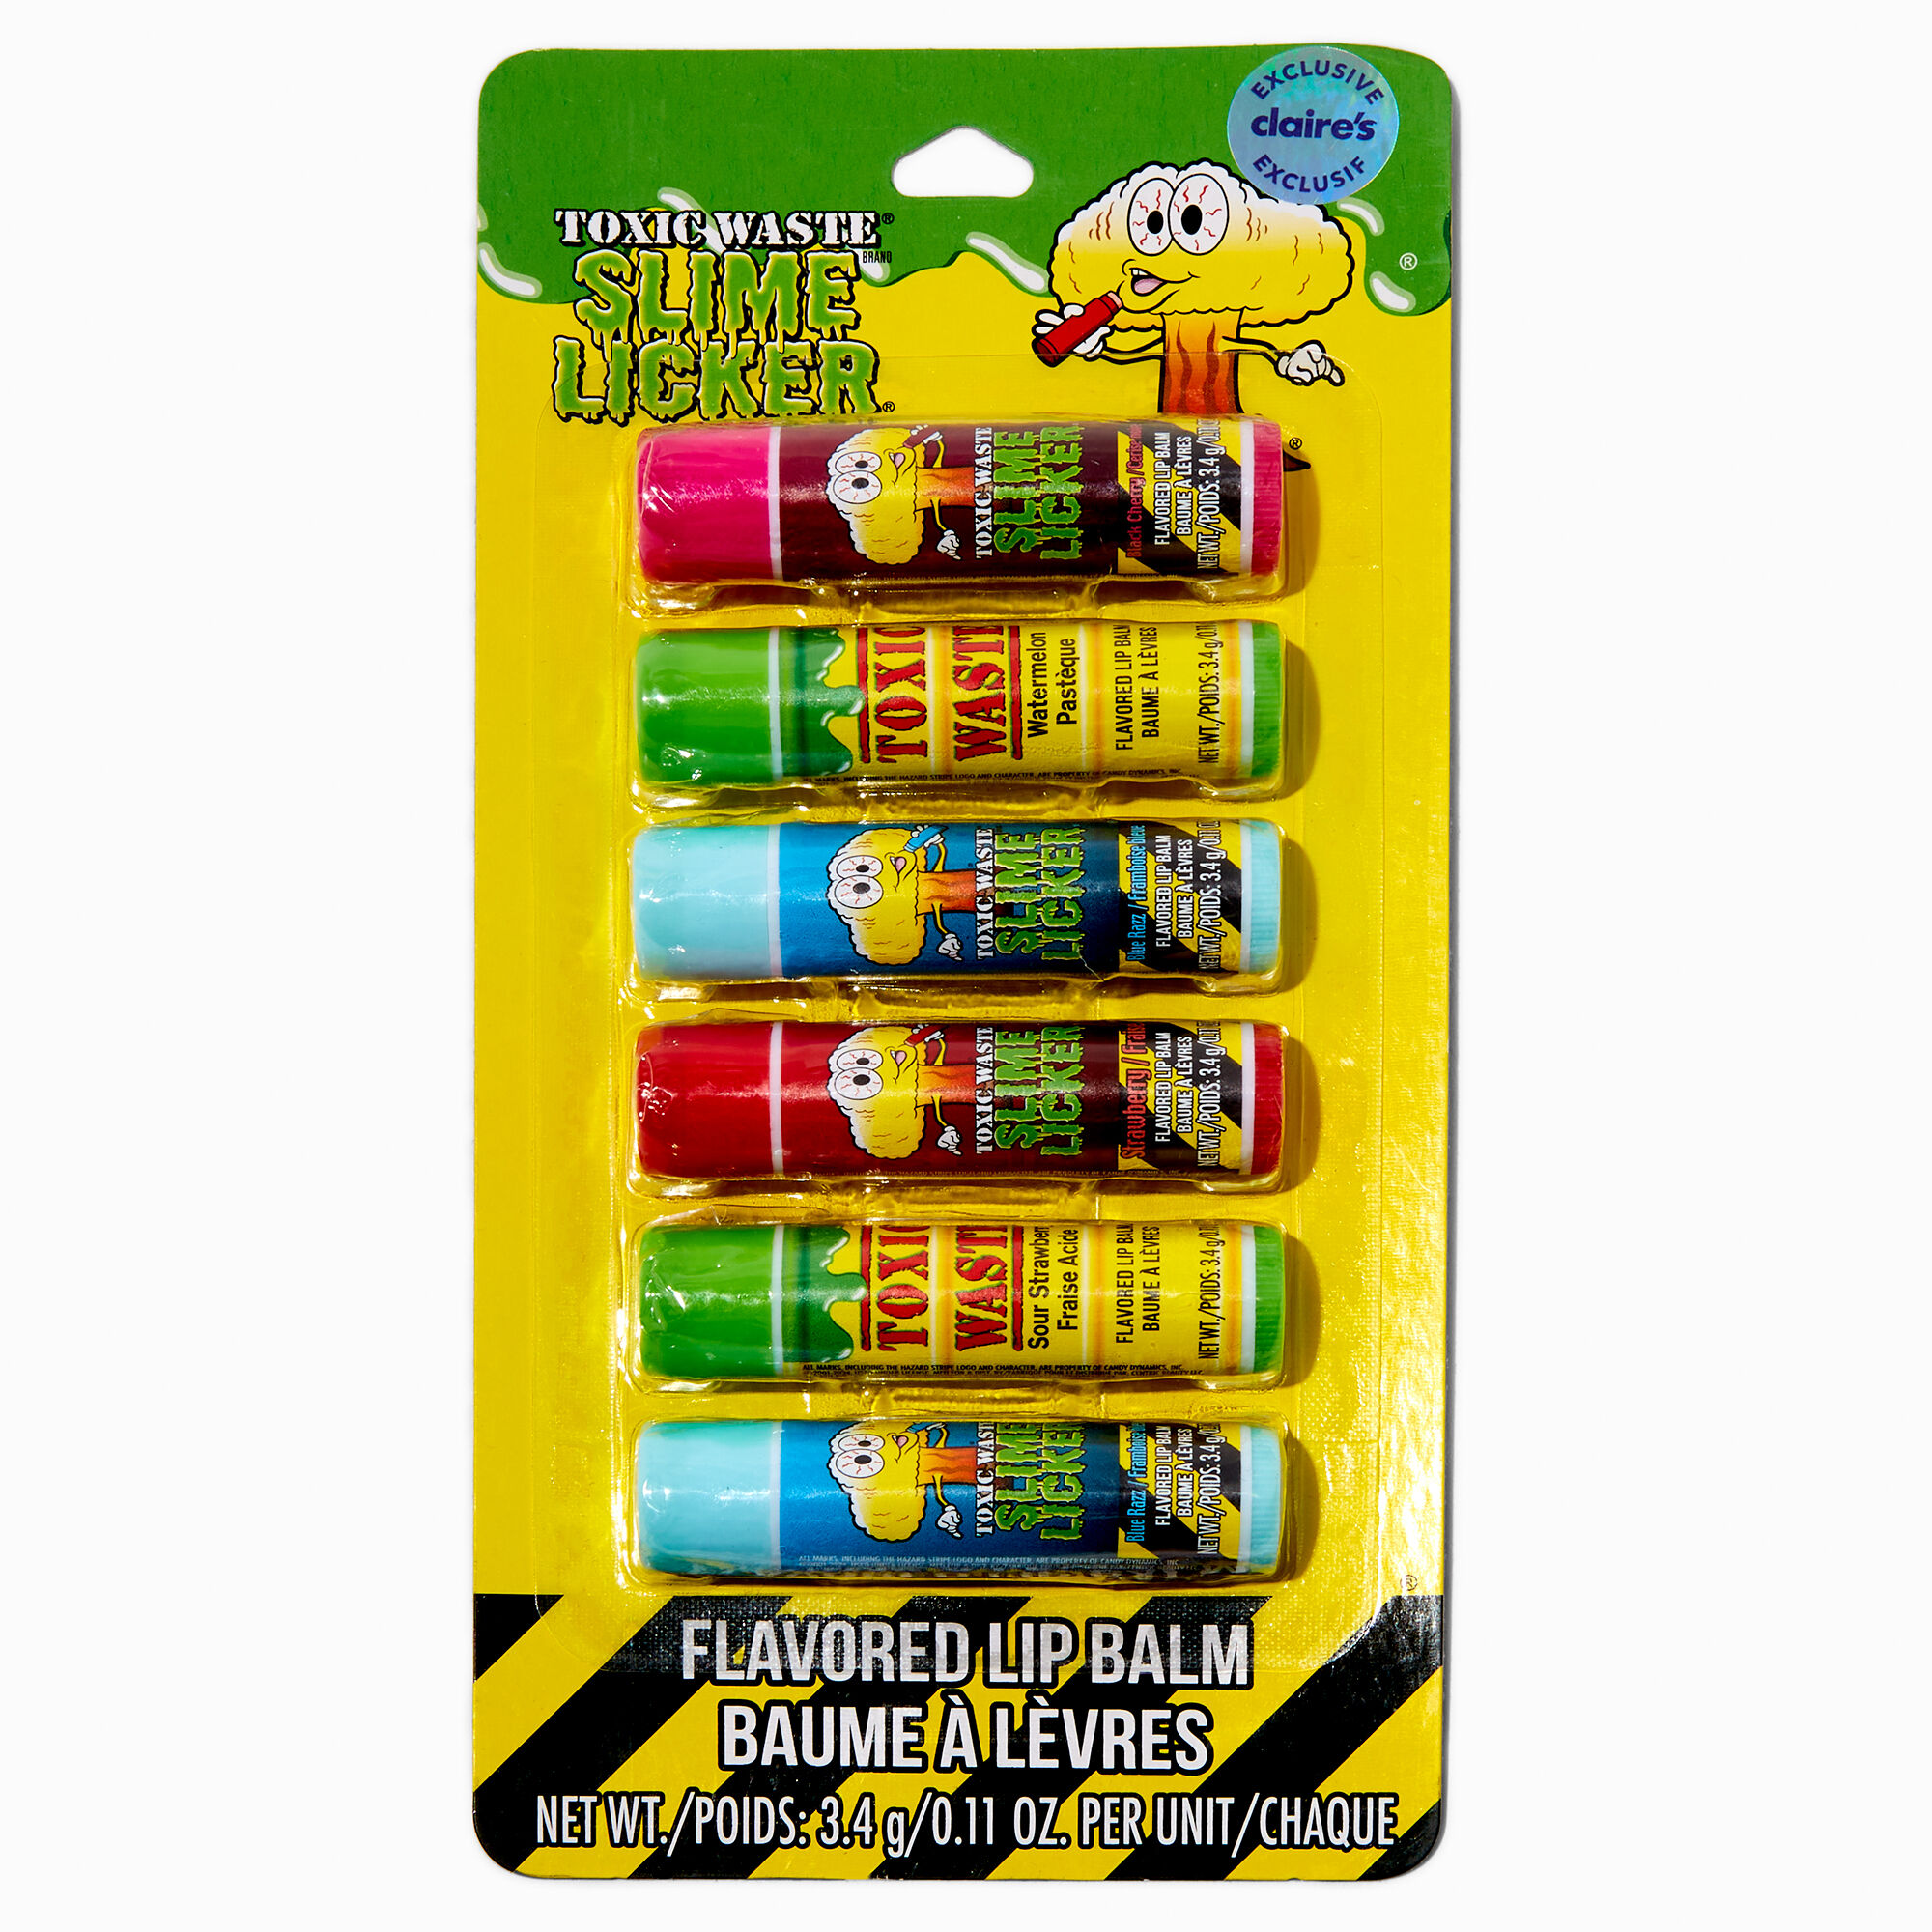 View Toxic Waste Slime Licker Claires Exclusive Flavored Lip Balm Set 6 Pack information